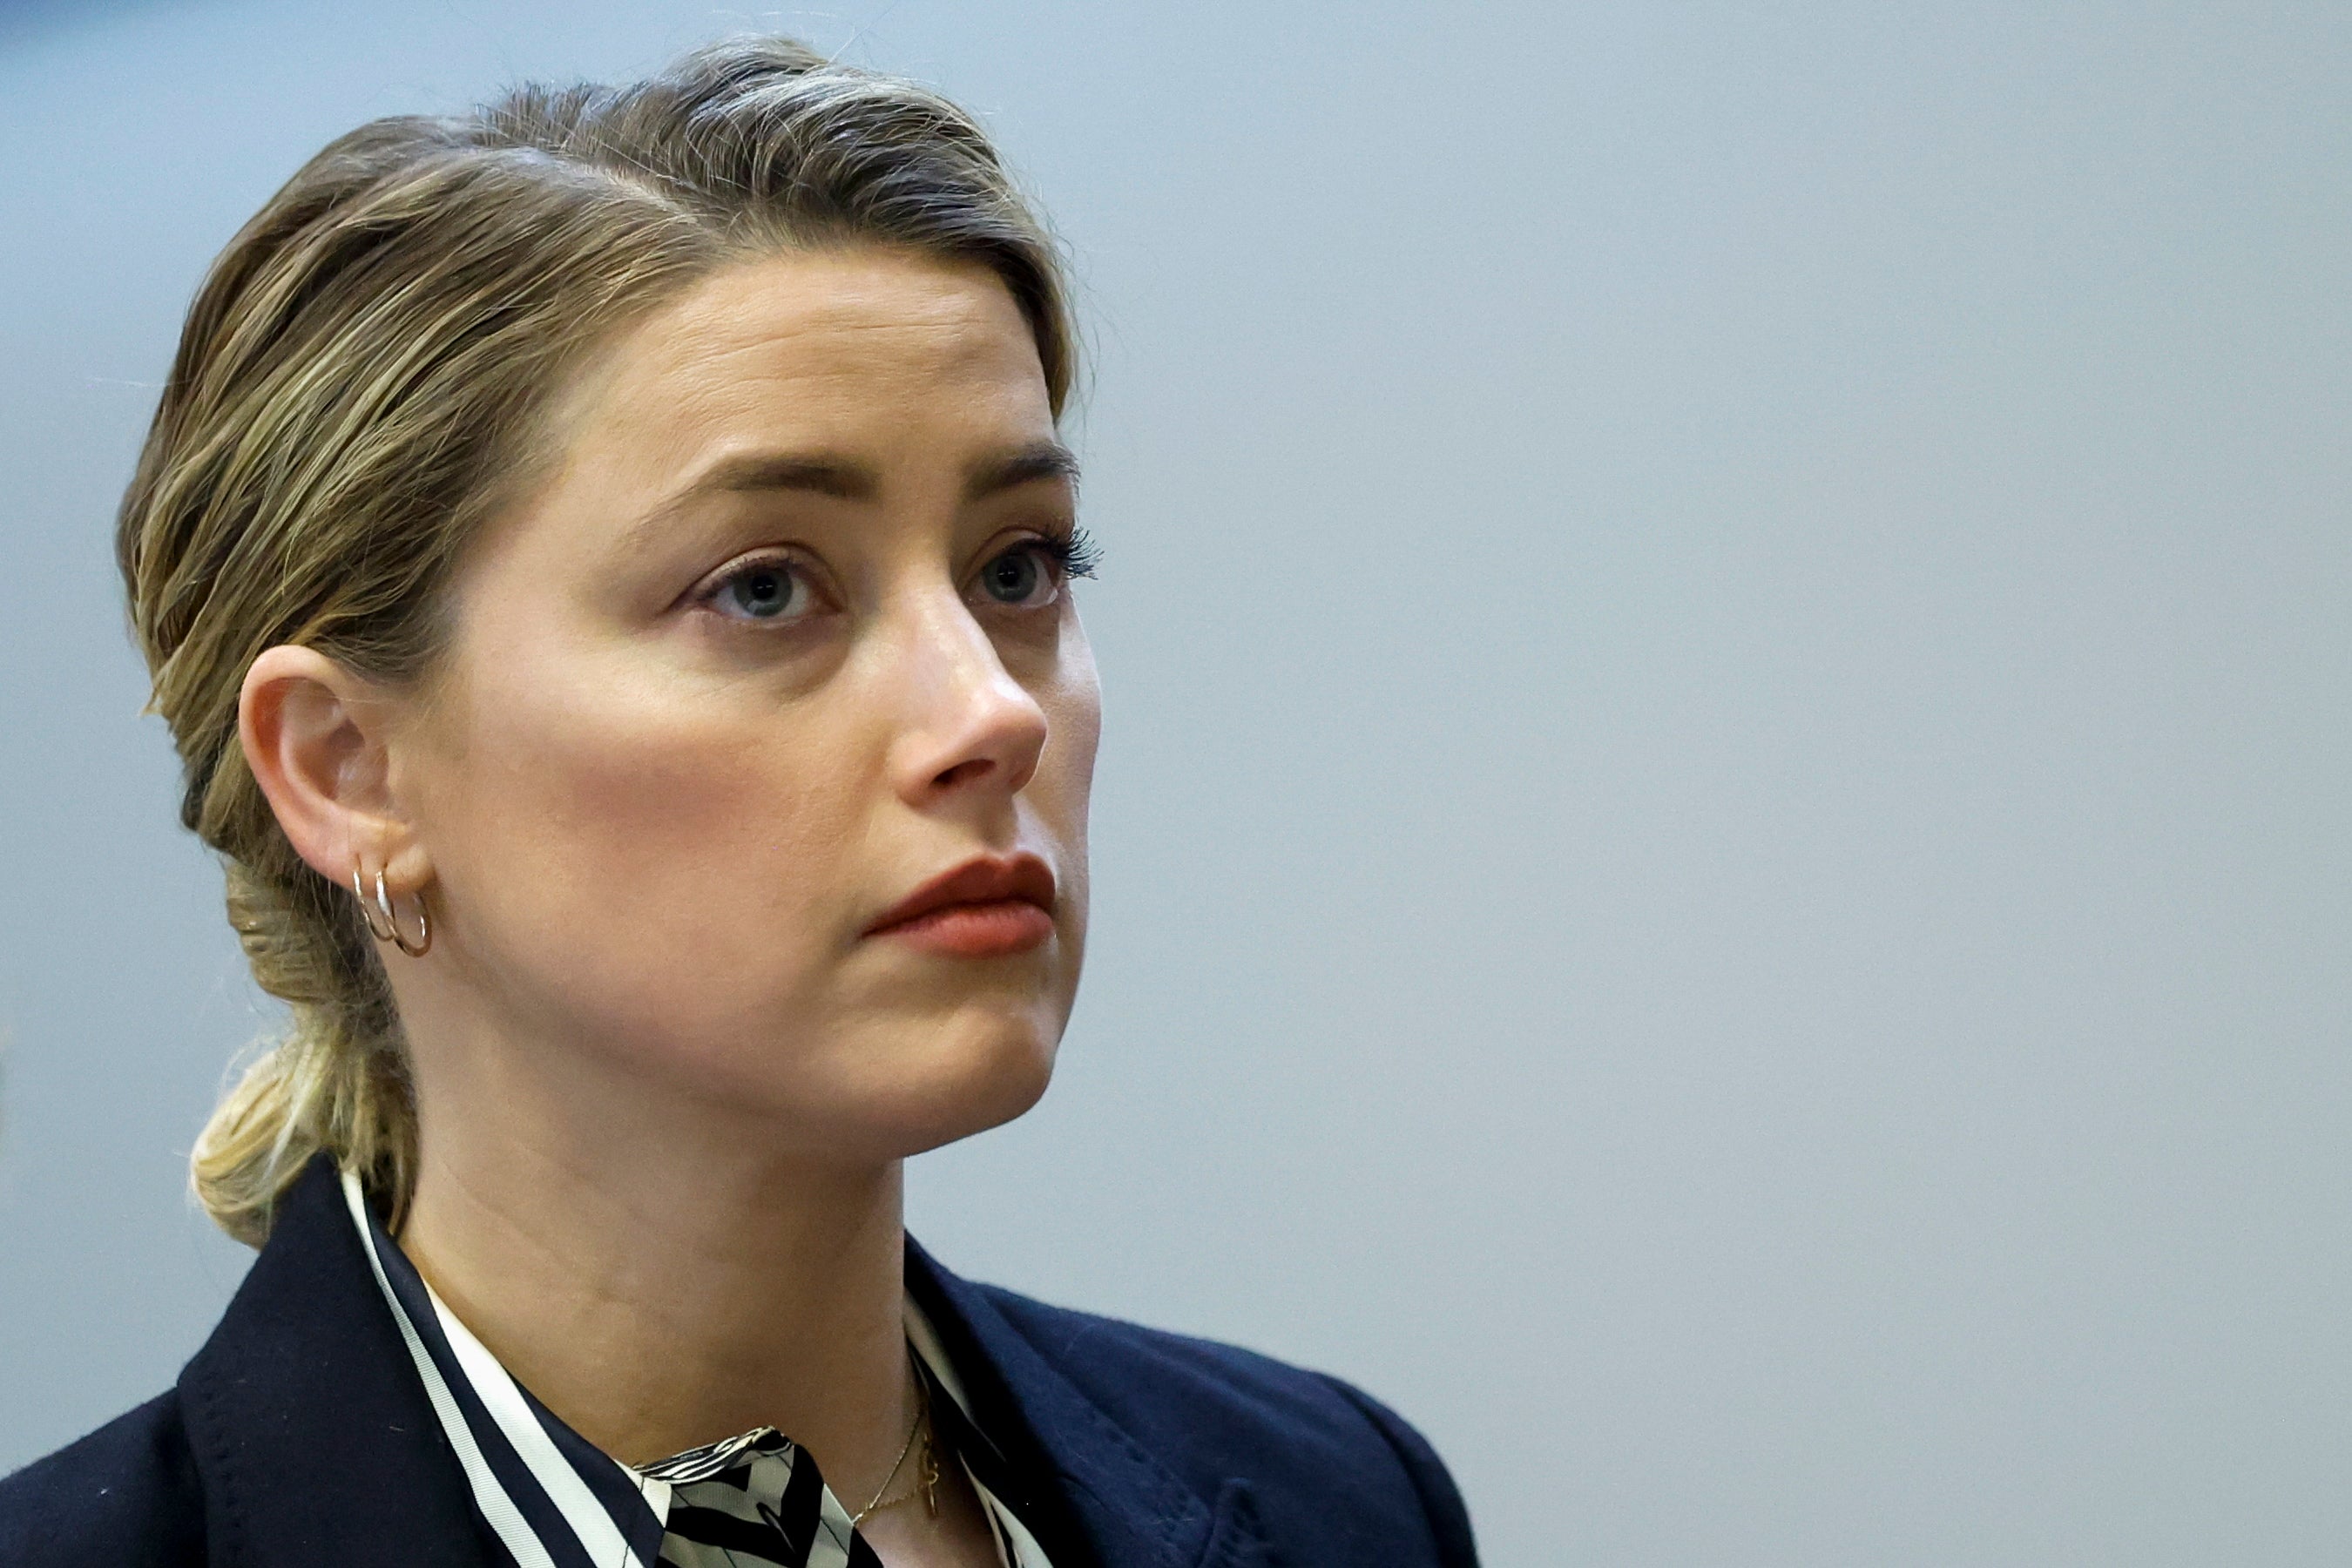 Amber Heard is expected to take the stand as soon as Monday